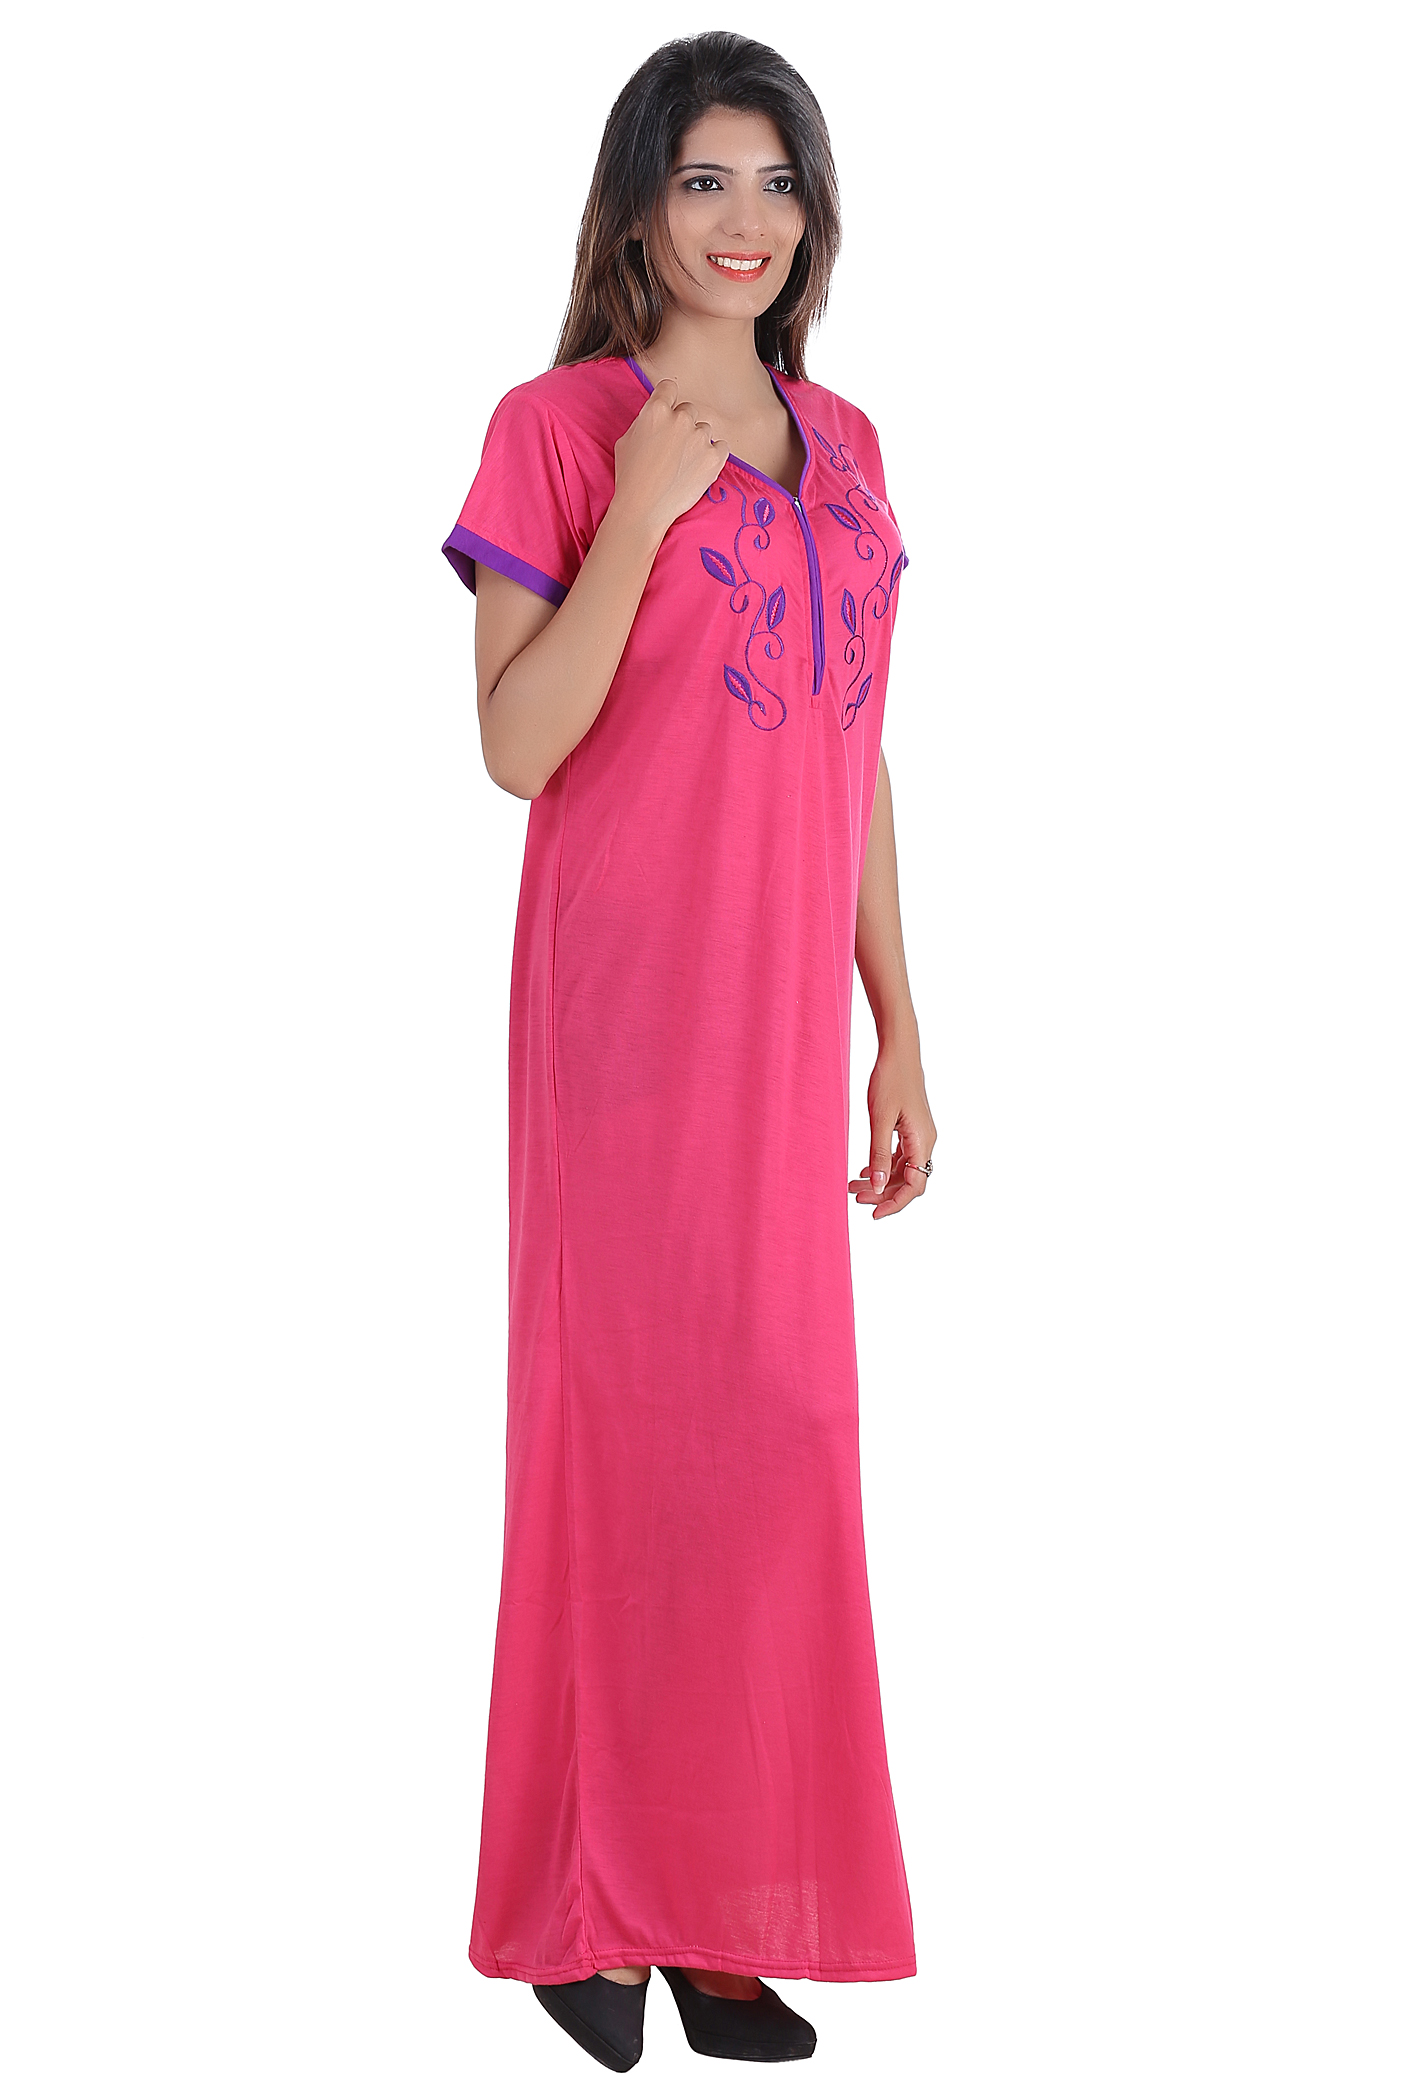 Buy Glossia Pink Cotton Nighty And Night Gowns Online ₹499 From Shopclues 